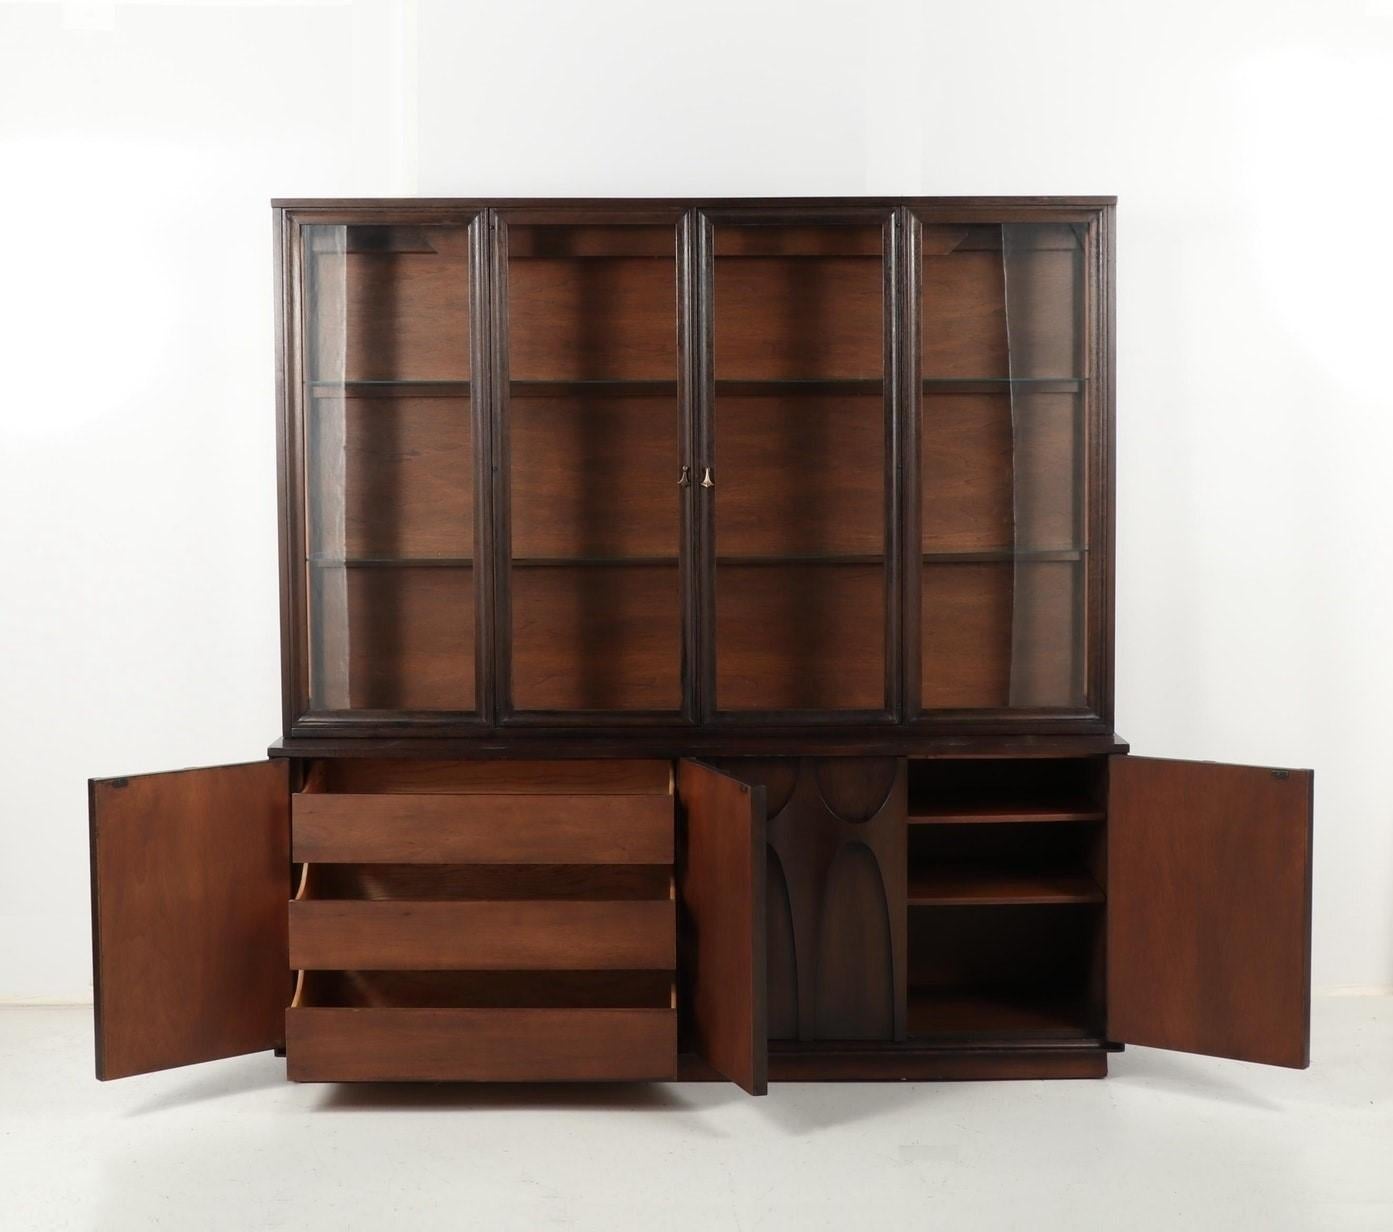 An exceptional Broyhill Brasilia Mid-Century Modern sculpted walnut credenza/sideboard with detachable hutch. It features gorgeous walnut wood grain, with sculpted arches and original pulls. Professionally refinished in dark walnut stain. It offers